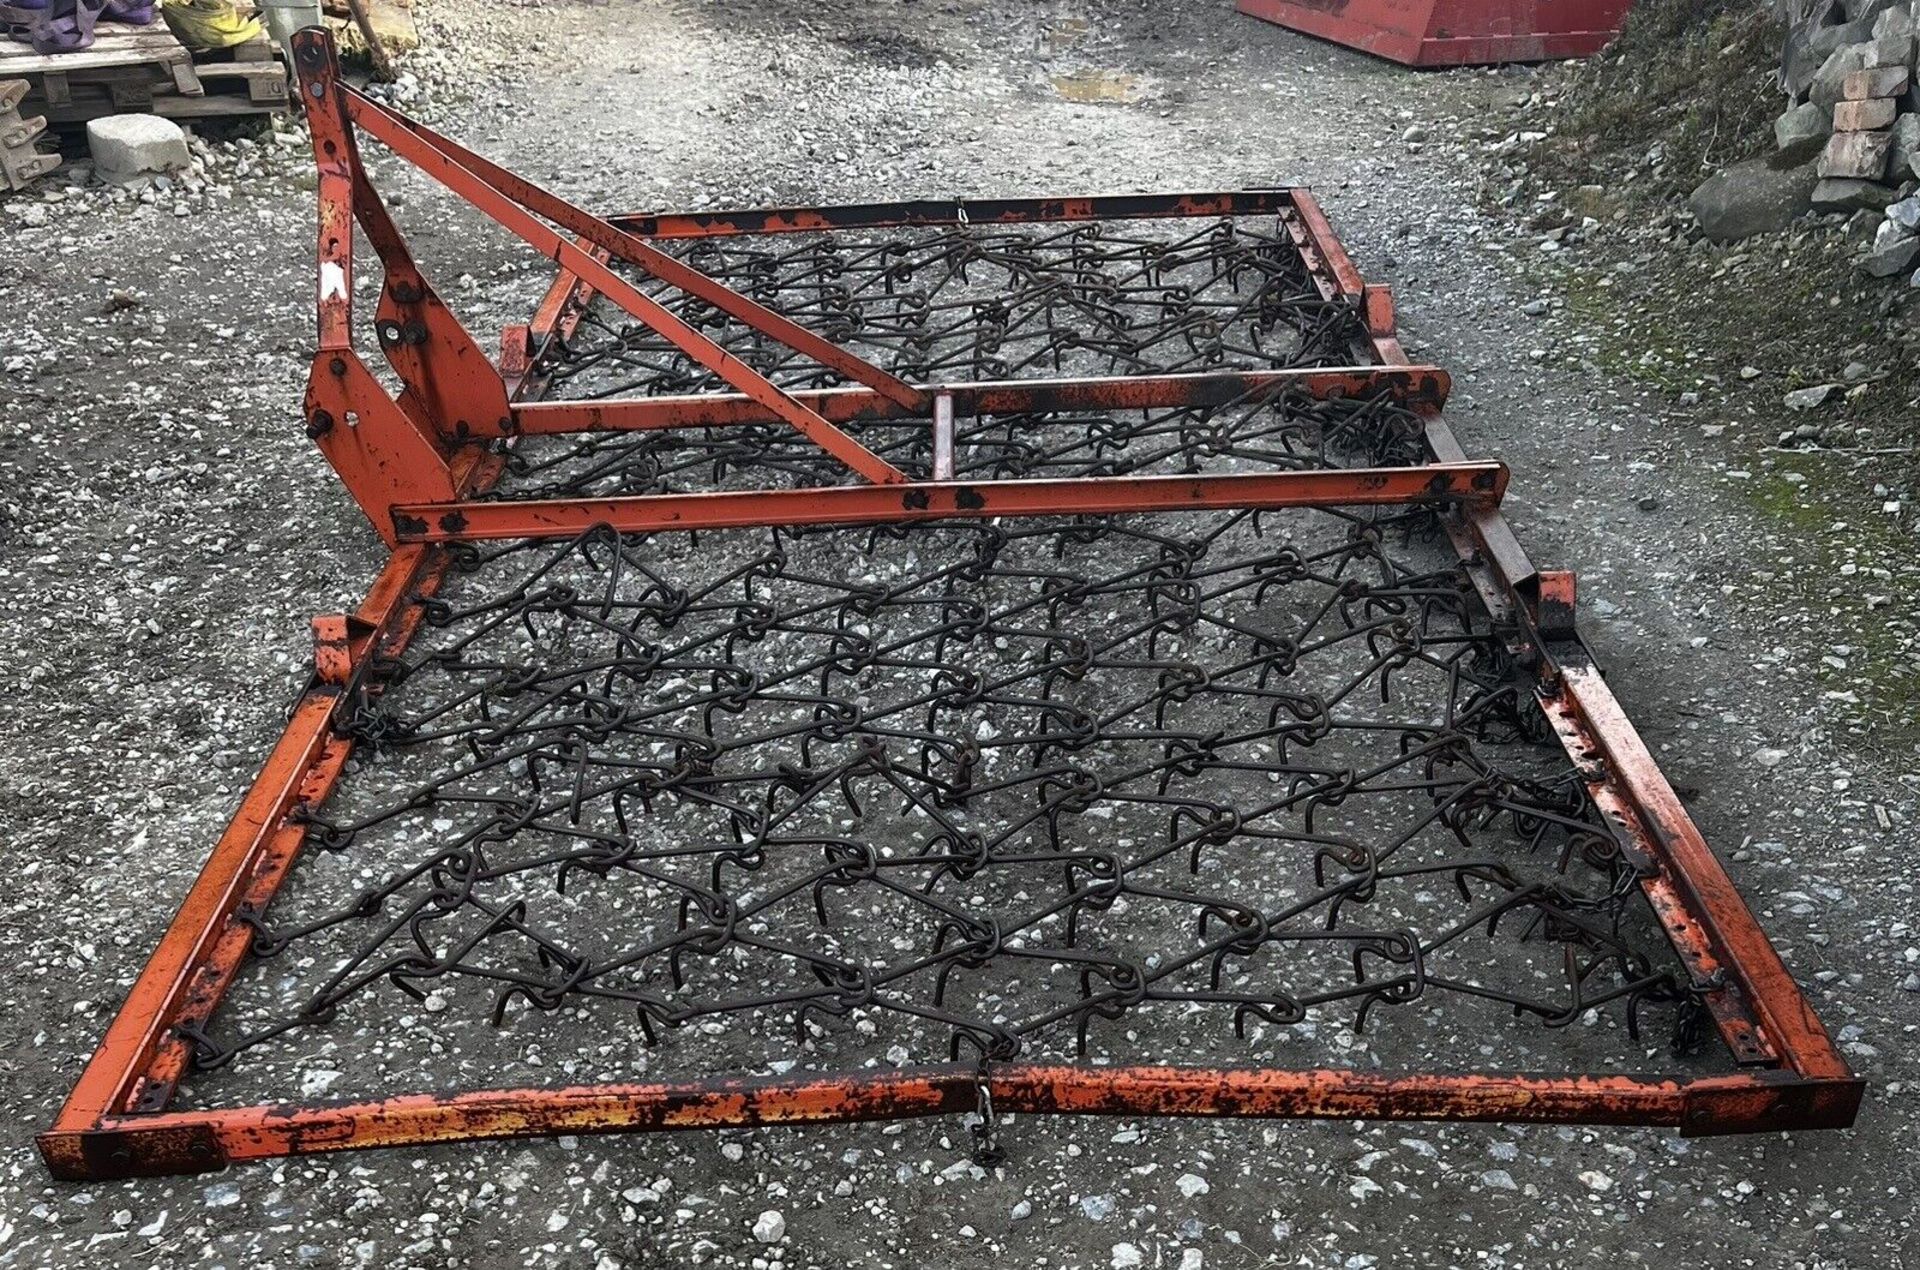 PARMITER 16 FT CHAIN HARROWS - Image 4 of 5